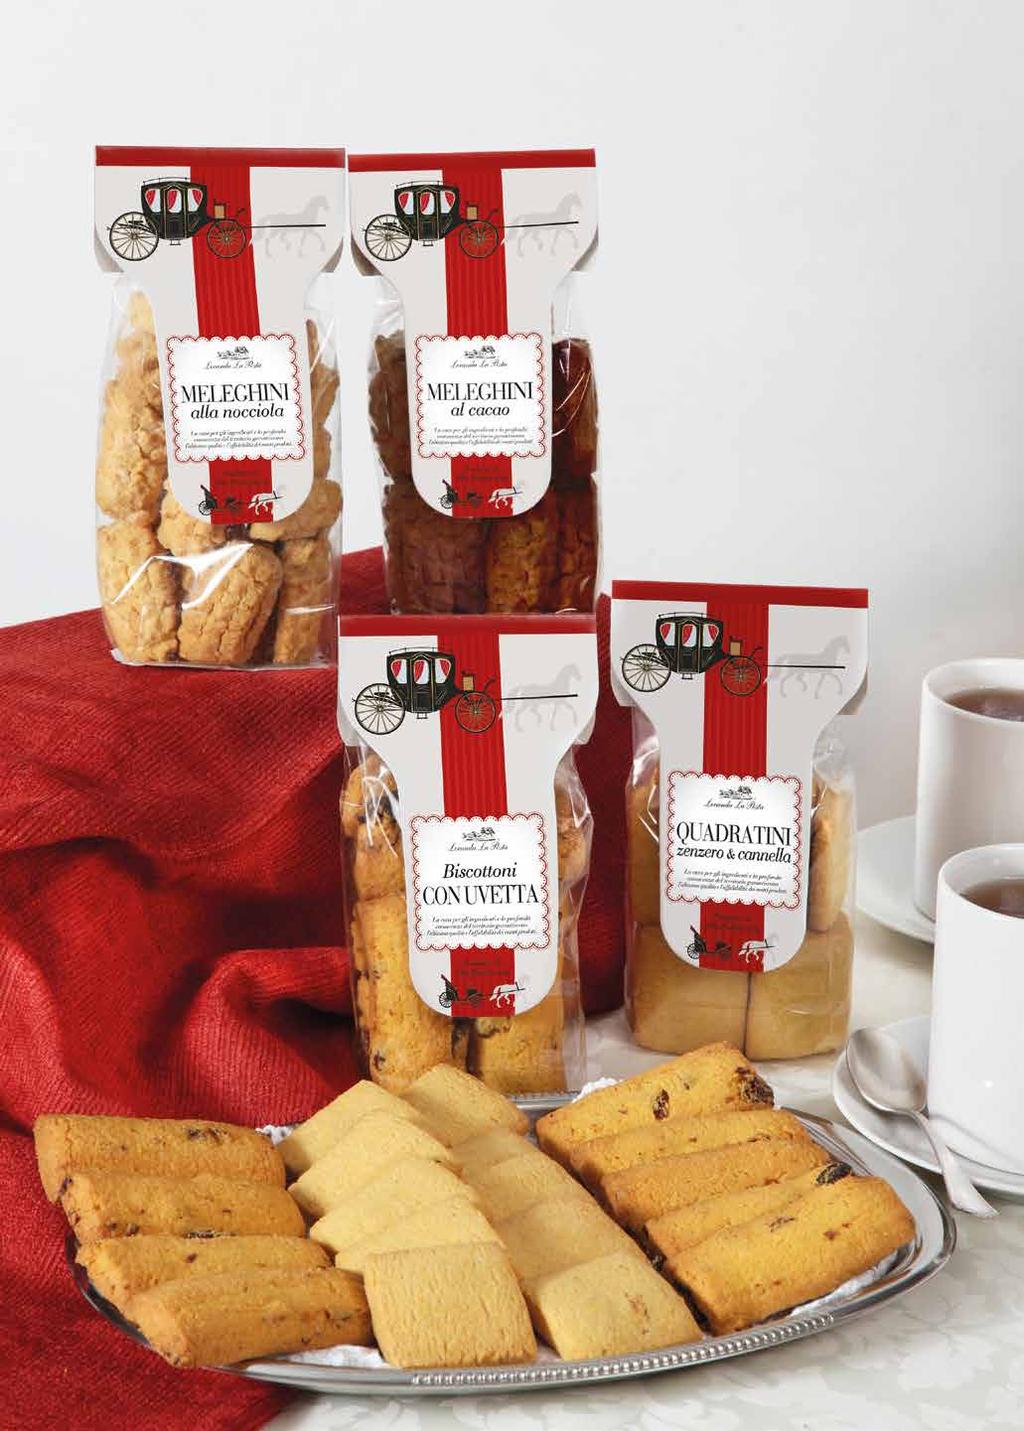 Haute Patisserie - Bisquits Box 08569 Biscuits with raisin 250 08570 Sugar and Ginger Square biscuits